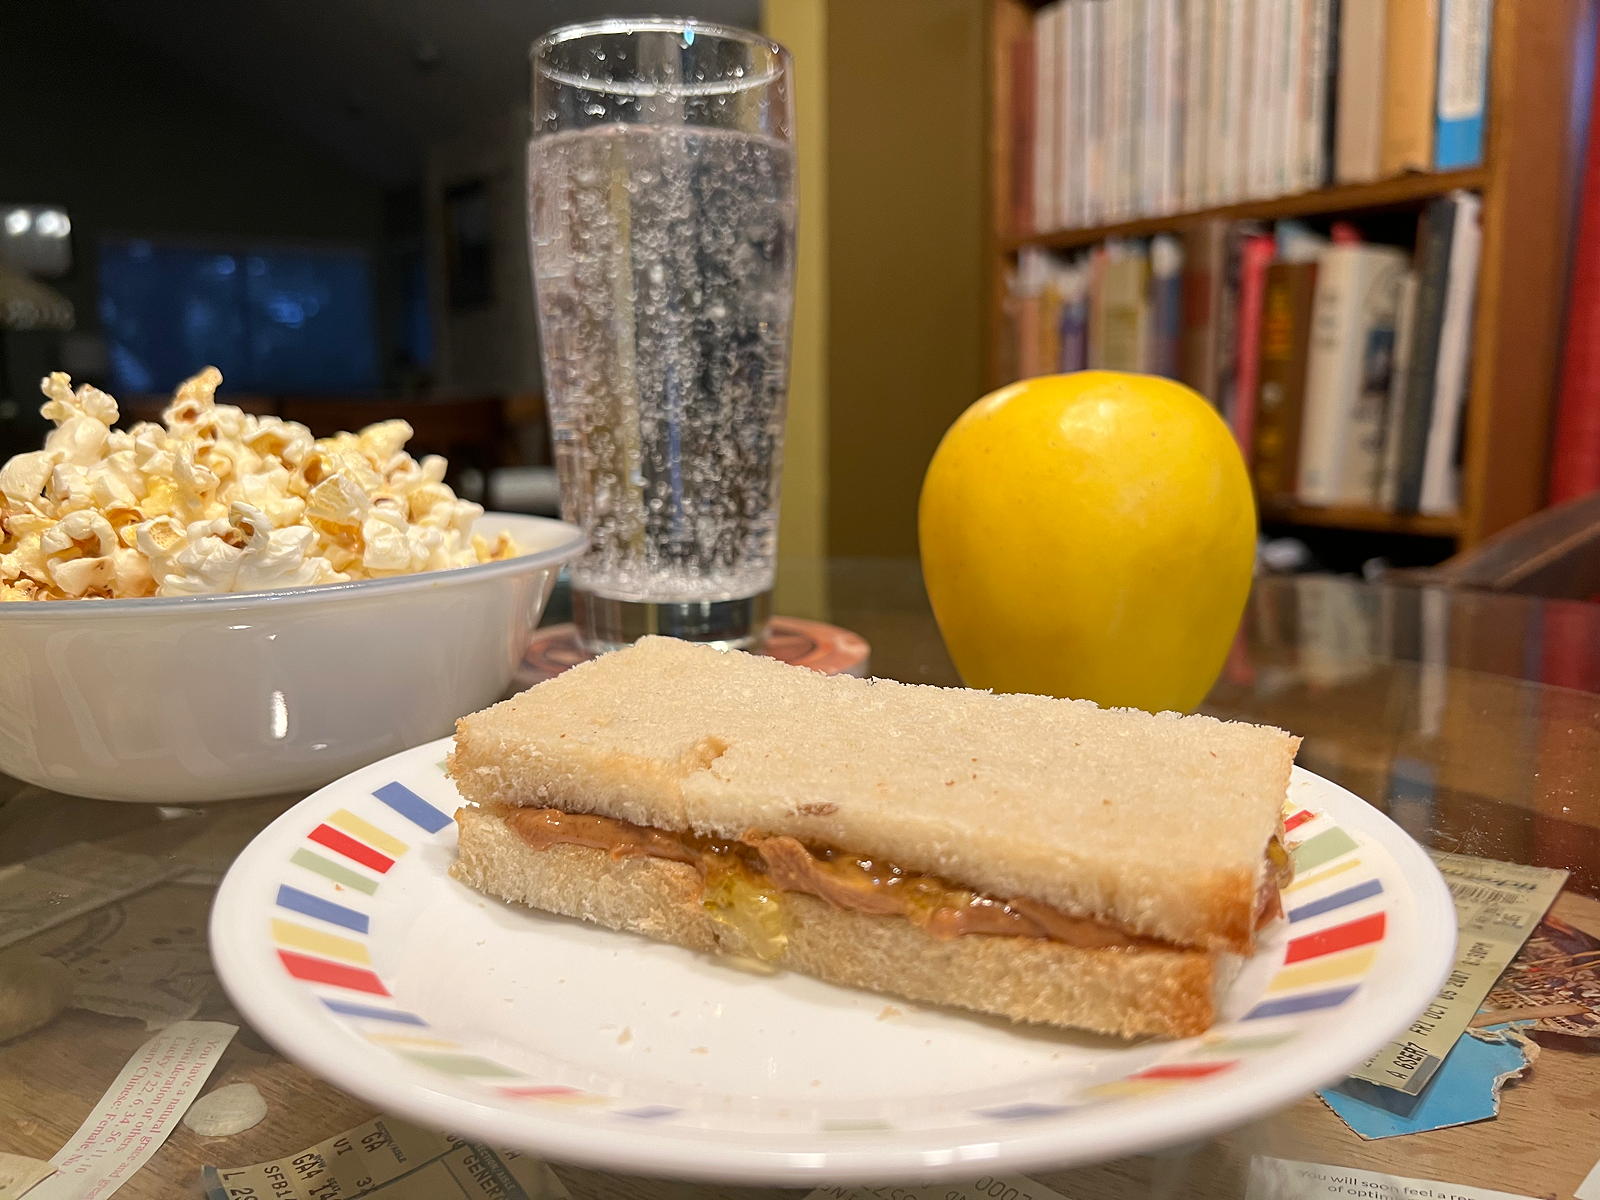 PB&J dinner: A peanut butter and jelly sandwich, popcorn, and an apple for a nutritious light dinner.; sandwiches; popcorn; apples; peanut butter; jelly; jam, marmalade